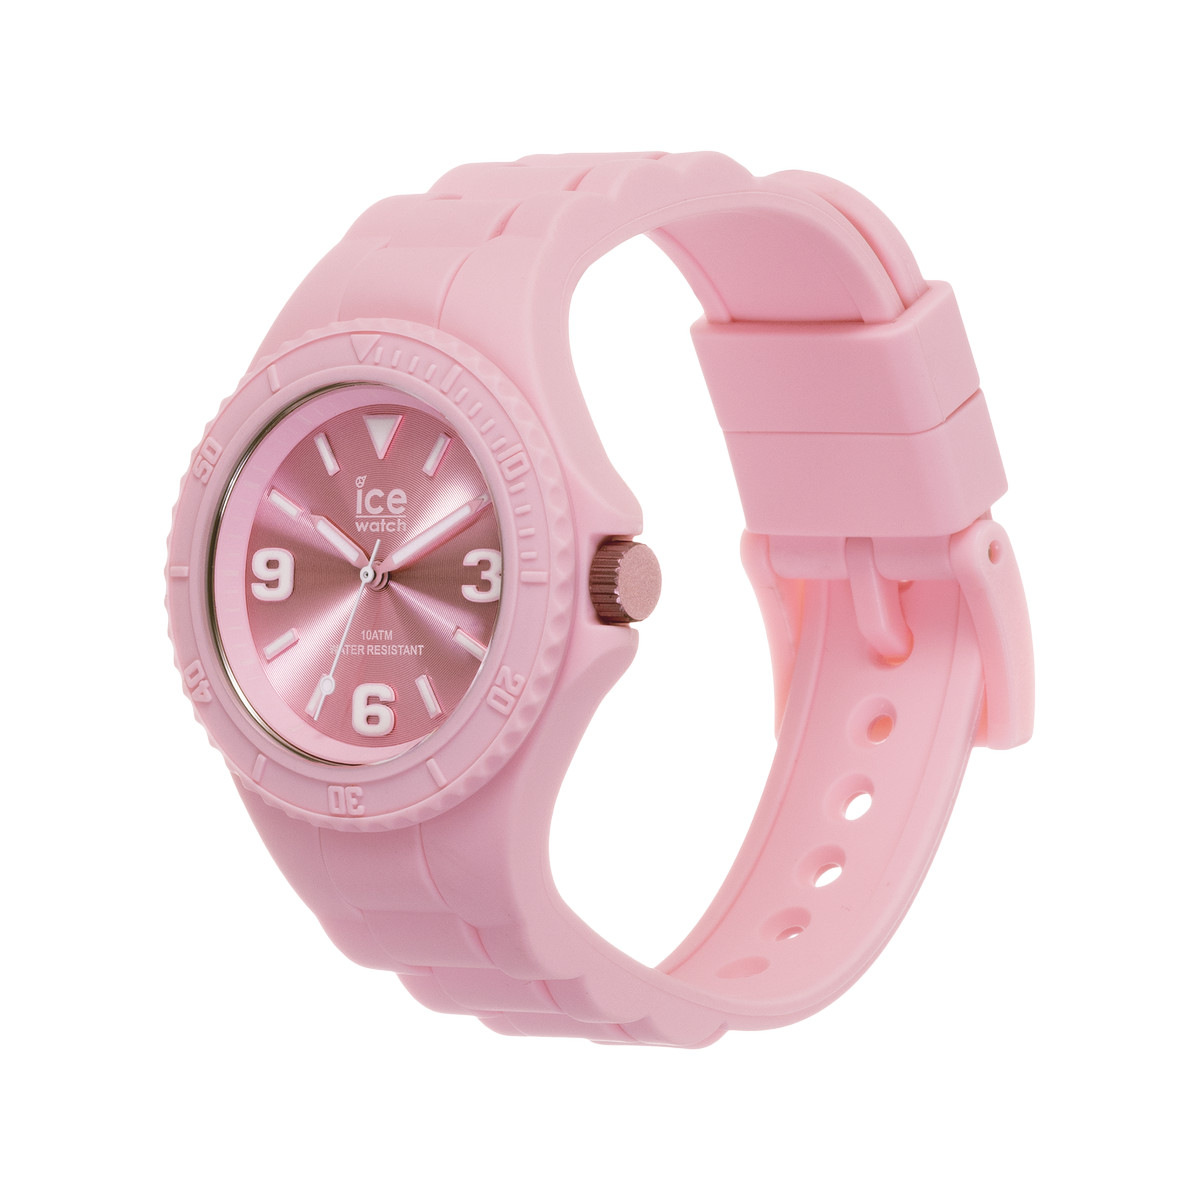 Montre Ice Watch small femme plastique silicone rose - vue 5